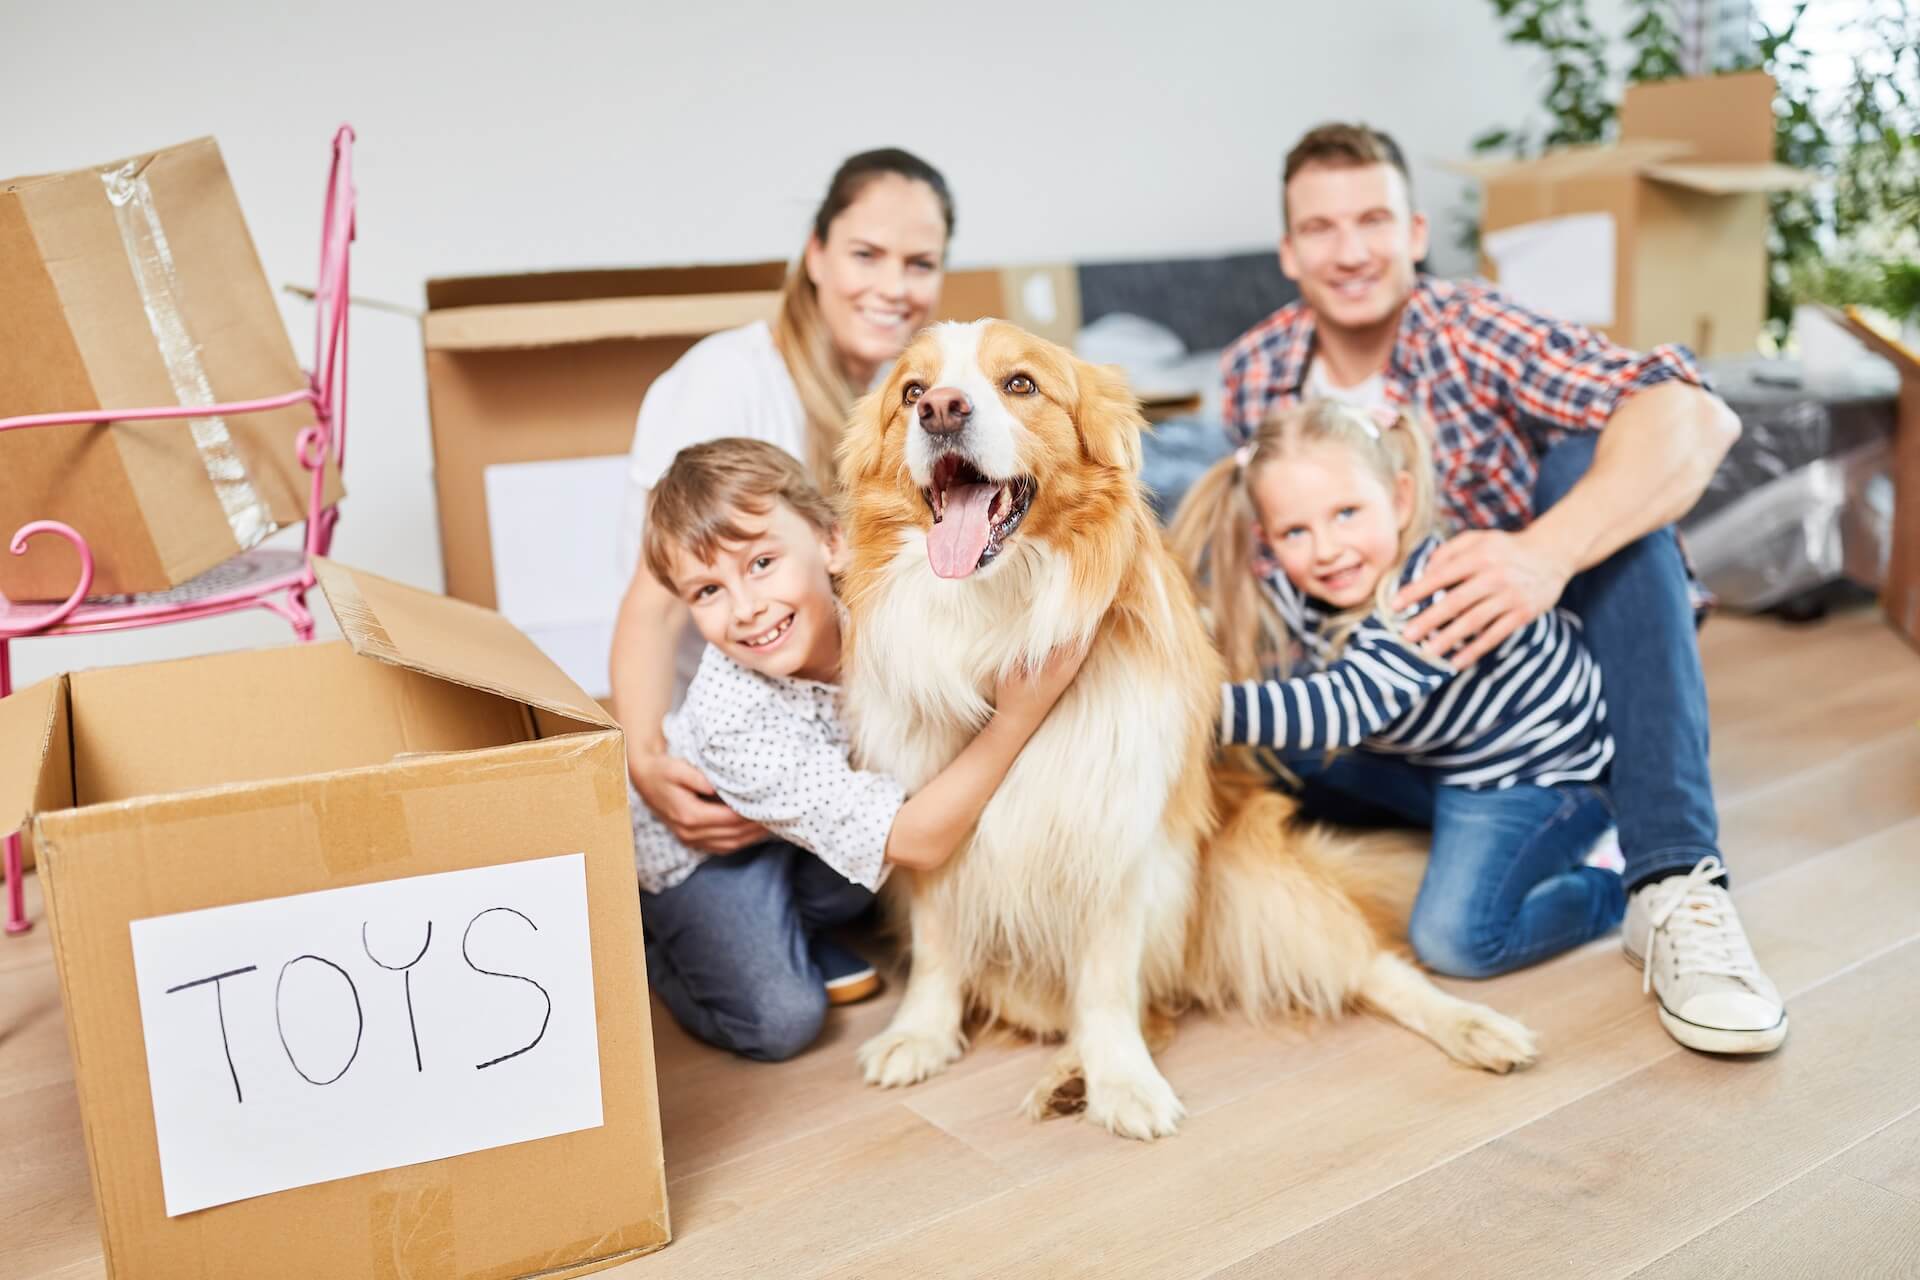 A picture of a family with a dog next to boxes